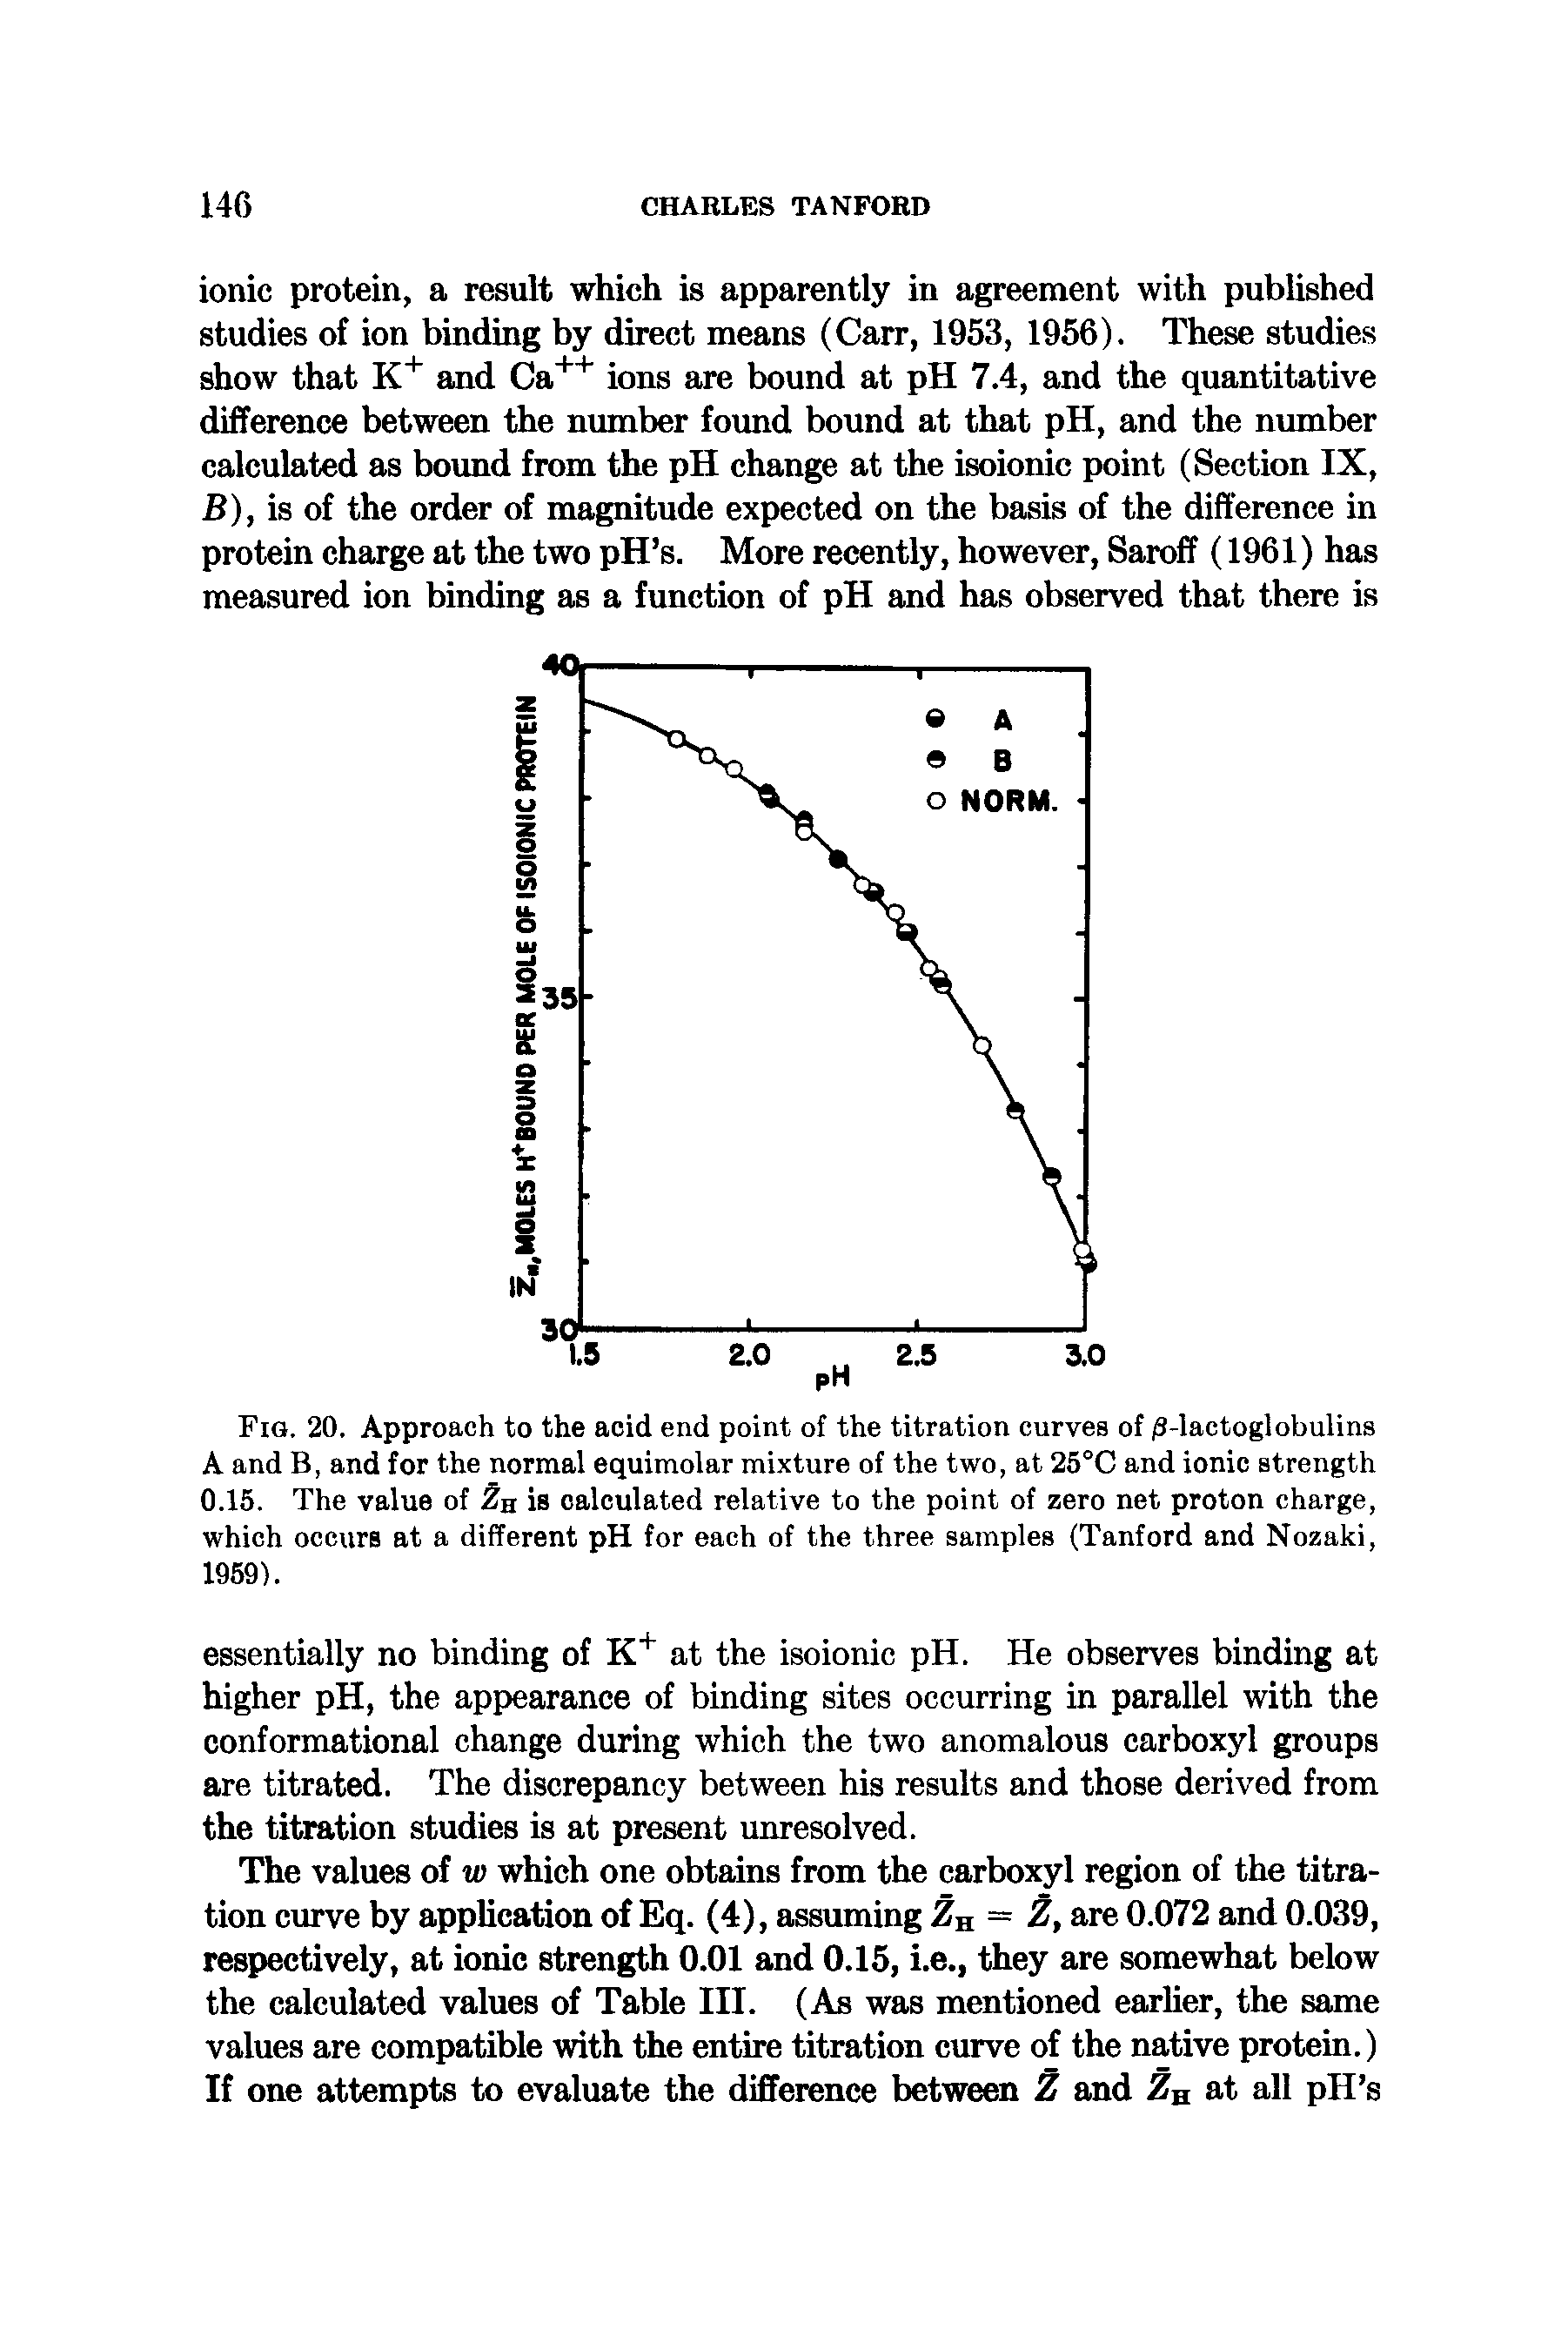 Fig. 20. Approach to the acid end point of the titration curves of /3-lactoglobulins A and B, and for the normal equimolar mixture of the two, at 25°C and ionic strength 0.15. The value of 2b is calculated relative to the point of zero net proton charge, which occurs at a different pH for each of the three samples (Tanford and Nozaki, 1959).